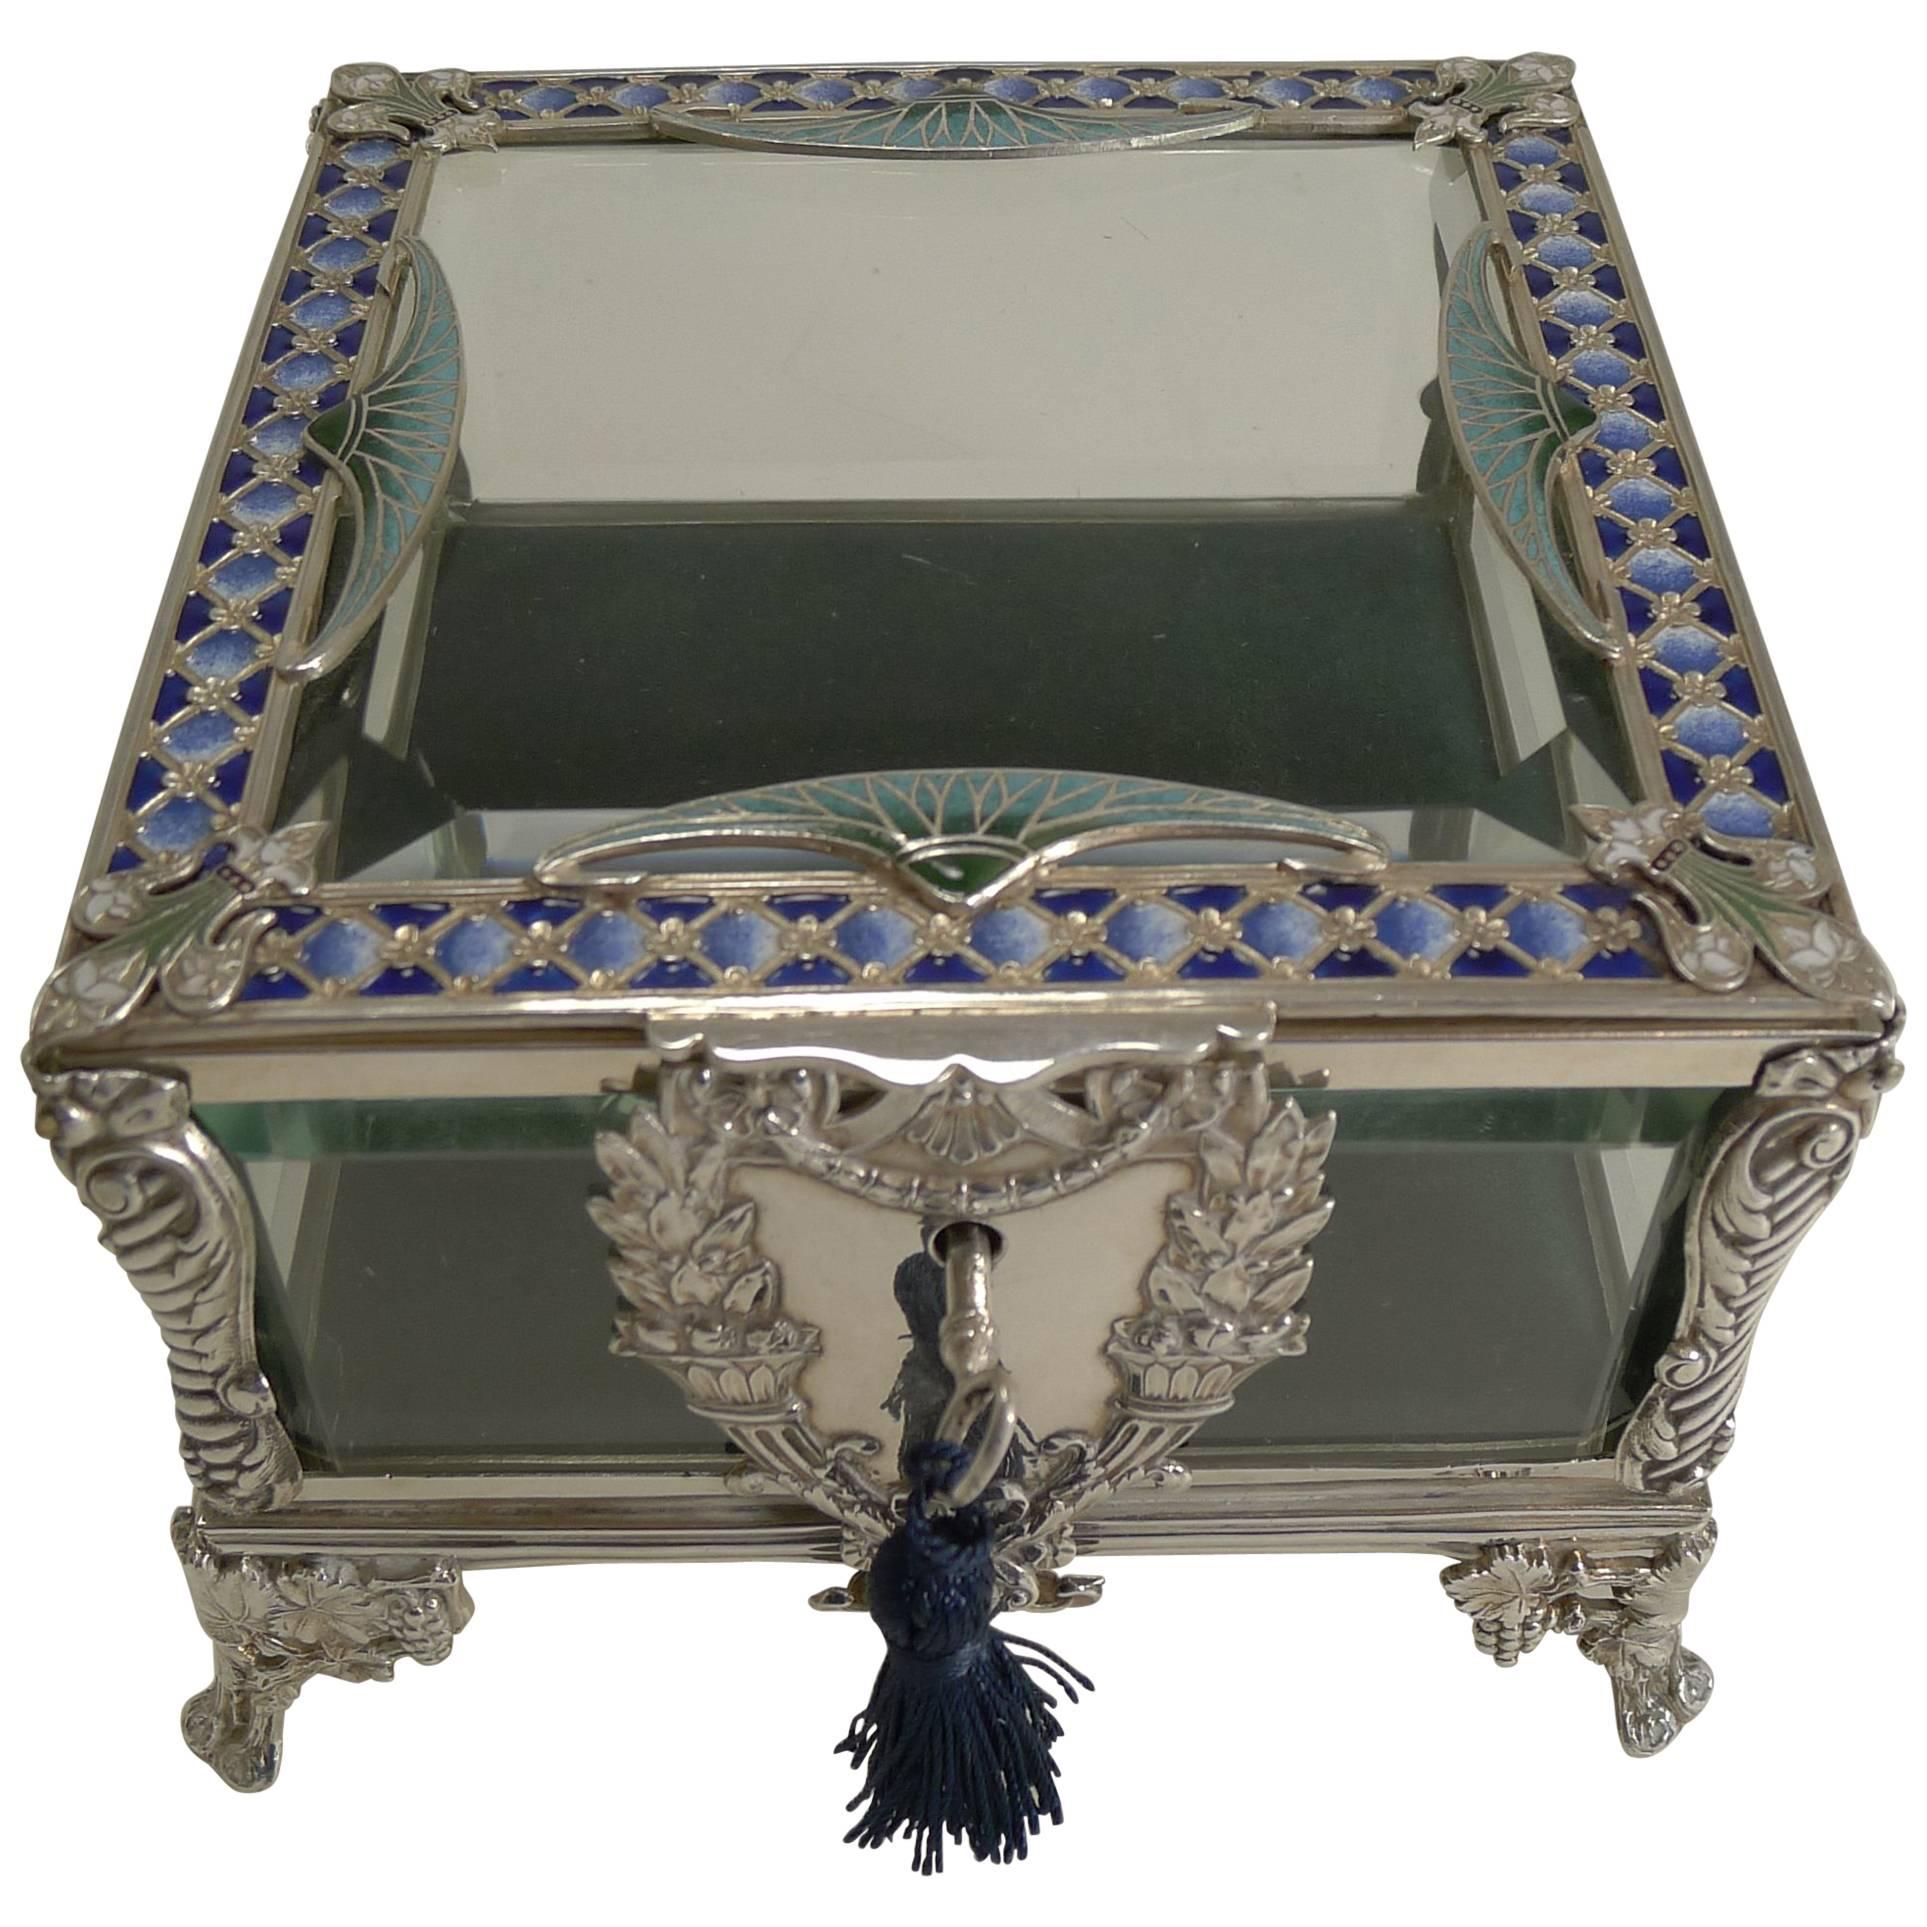 French Art Nouveau Silver Plate and Enamel Jewelry Box, circa 1900